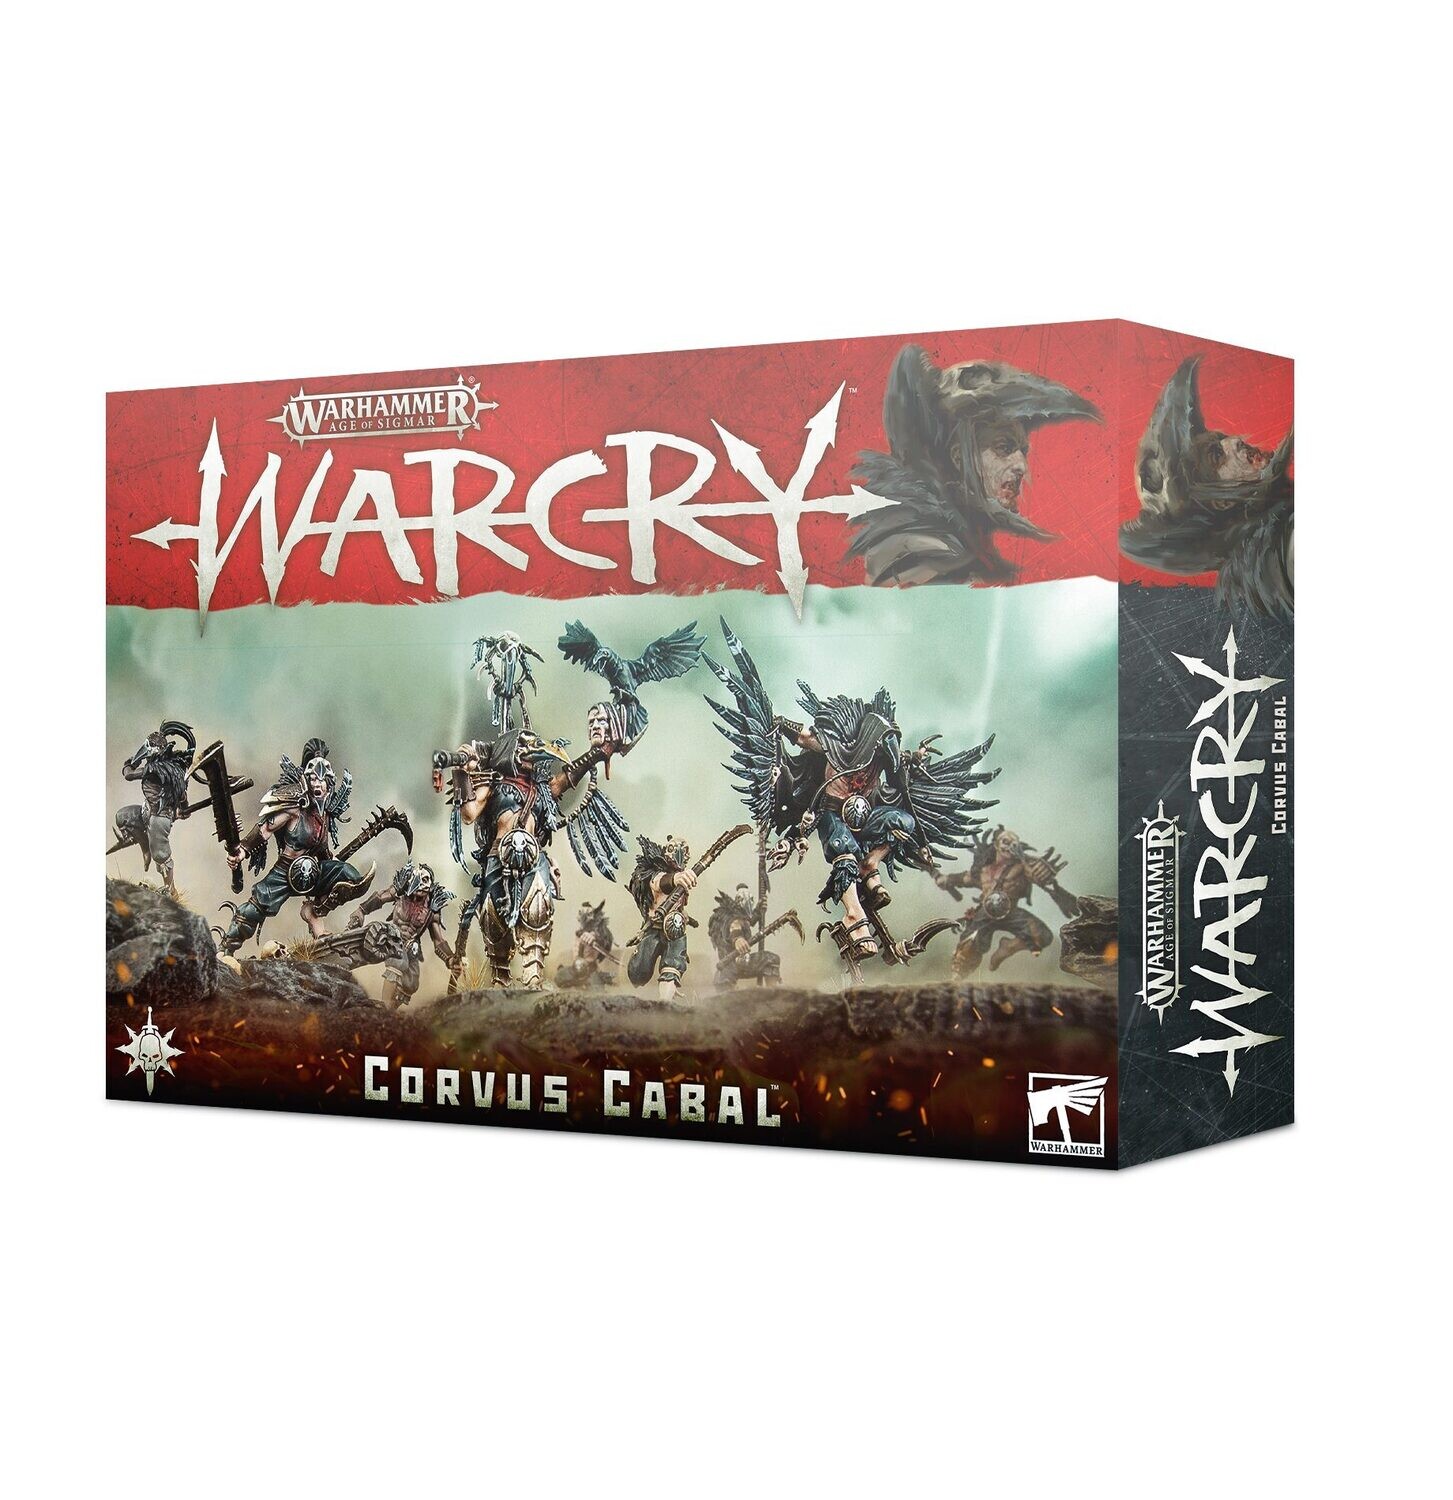 111-03 Warcry: Corvus Cabal